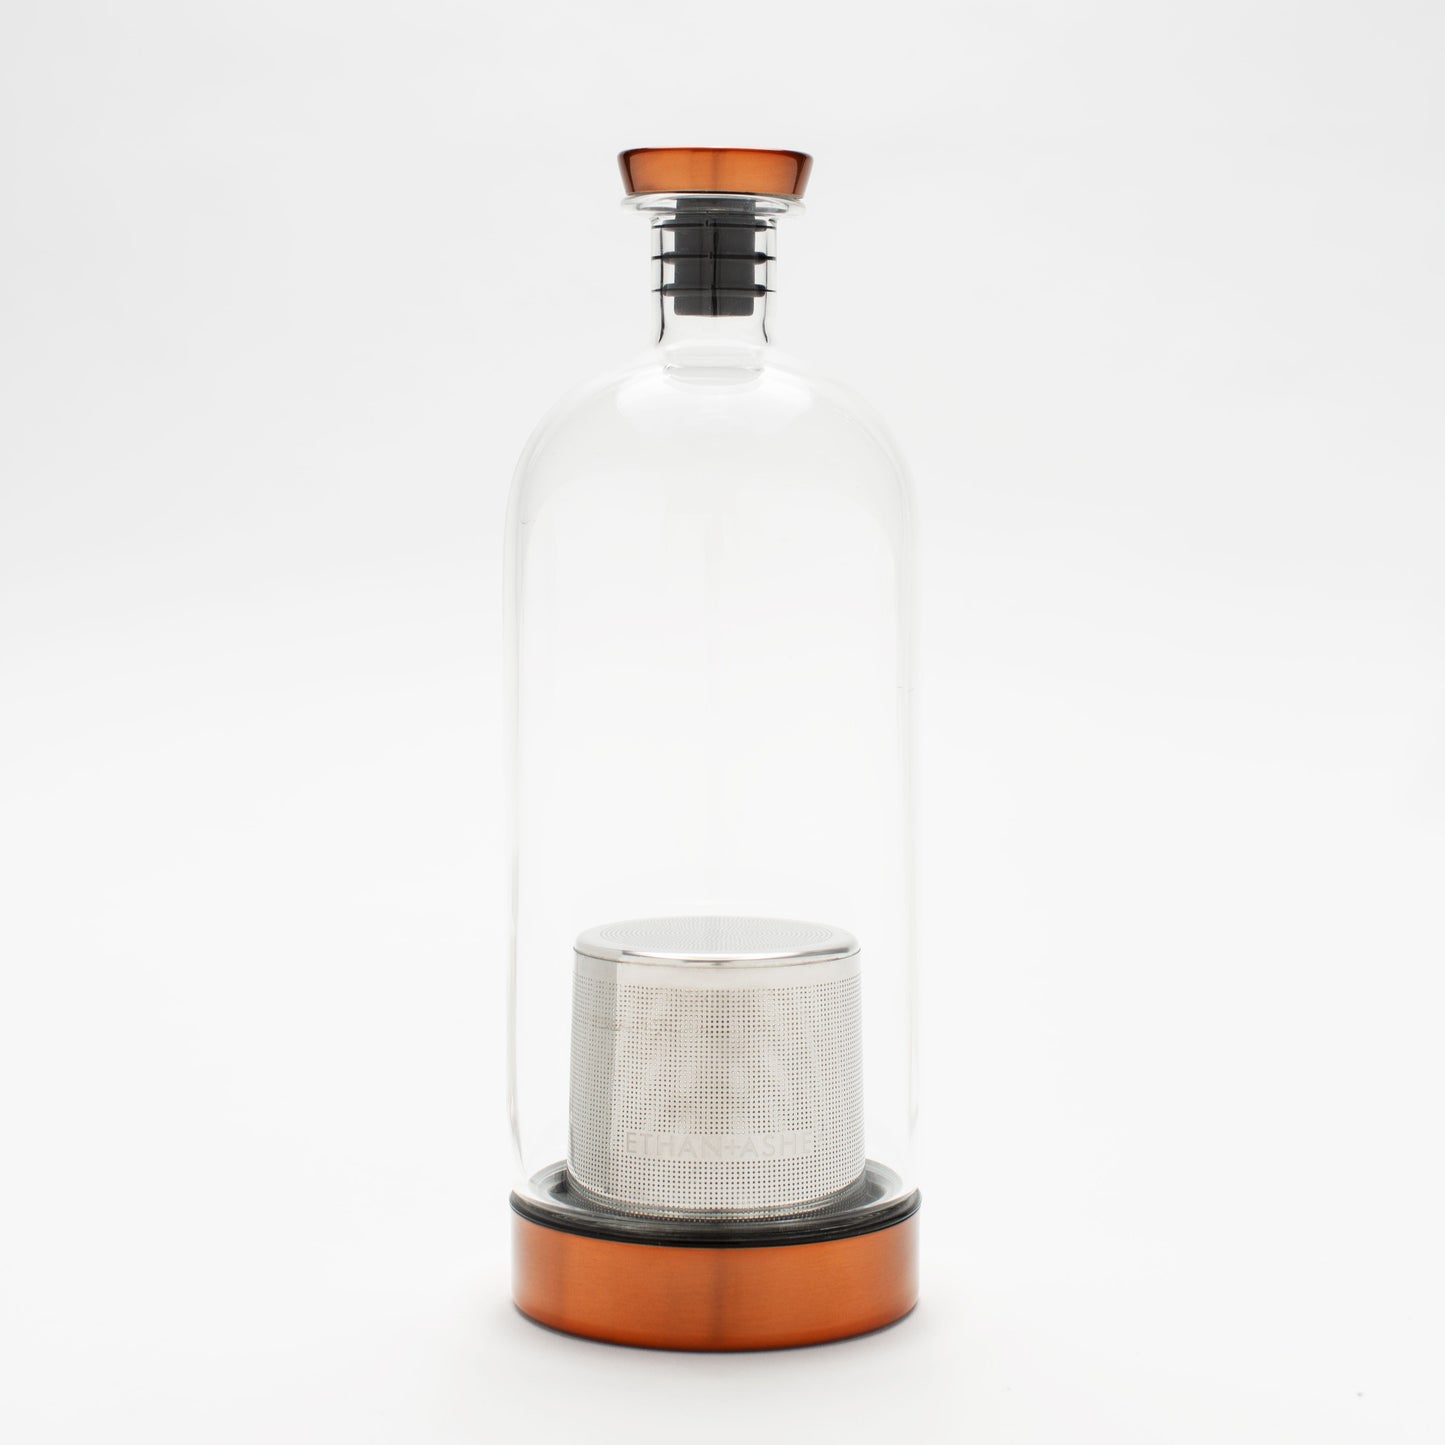 Alkemista Infusion Vessel by Ethan+Ashe